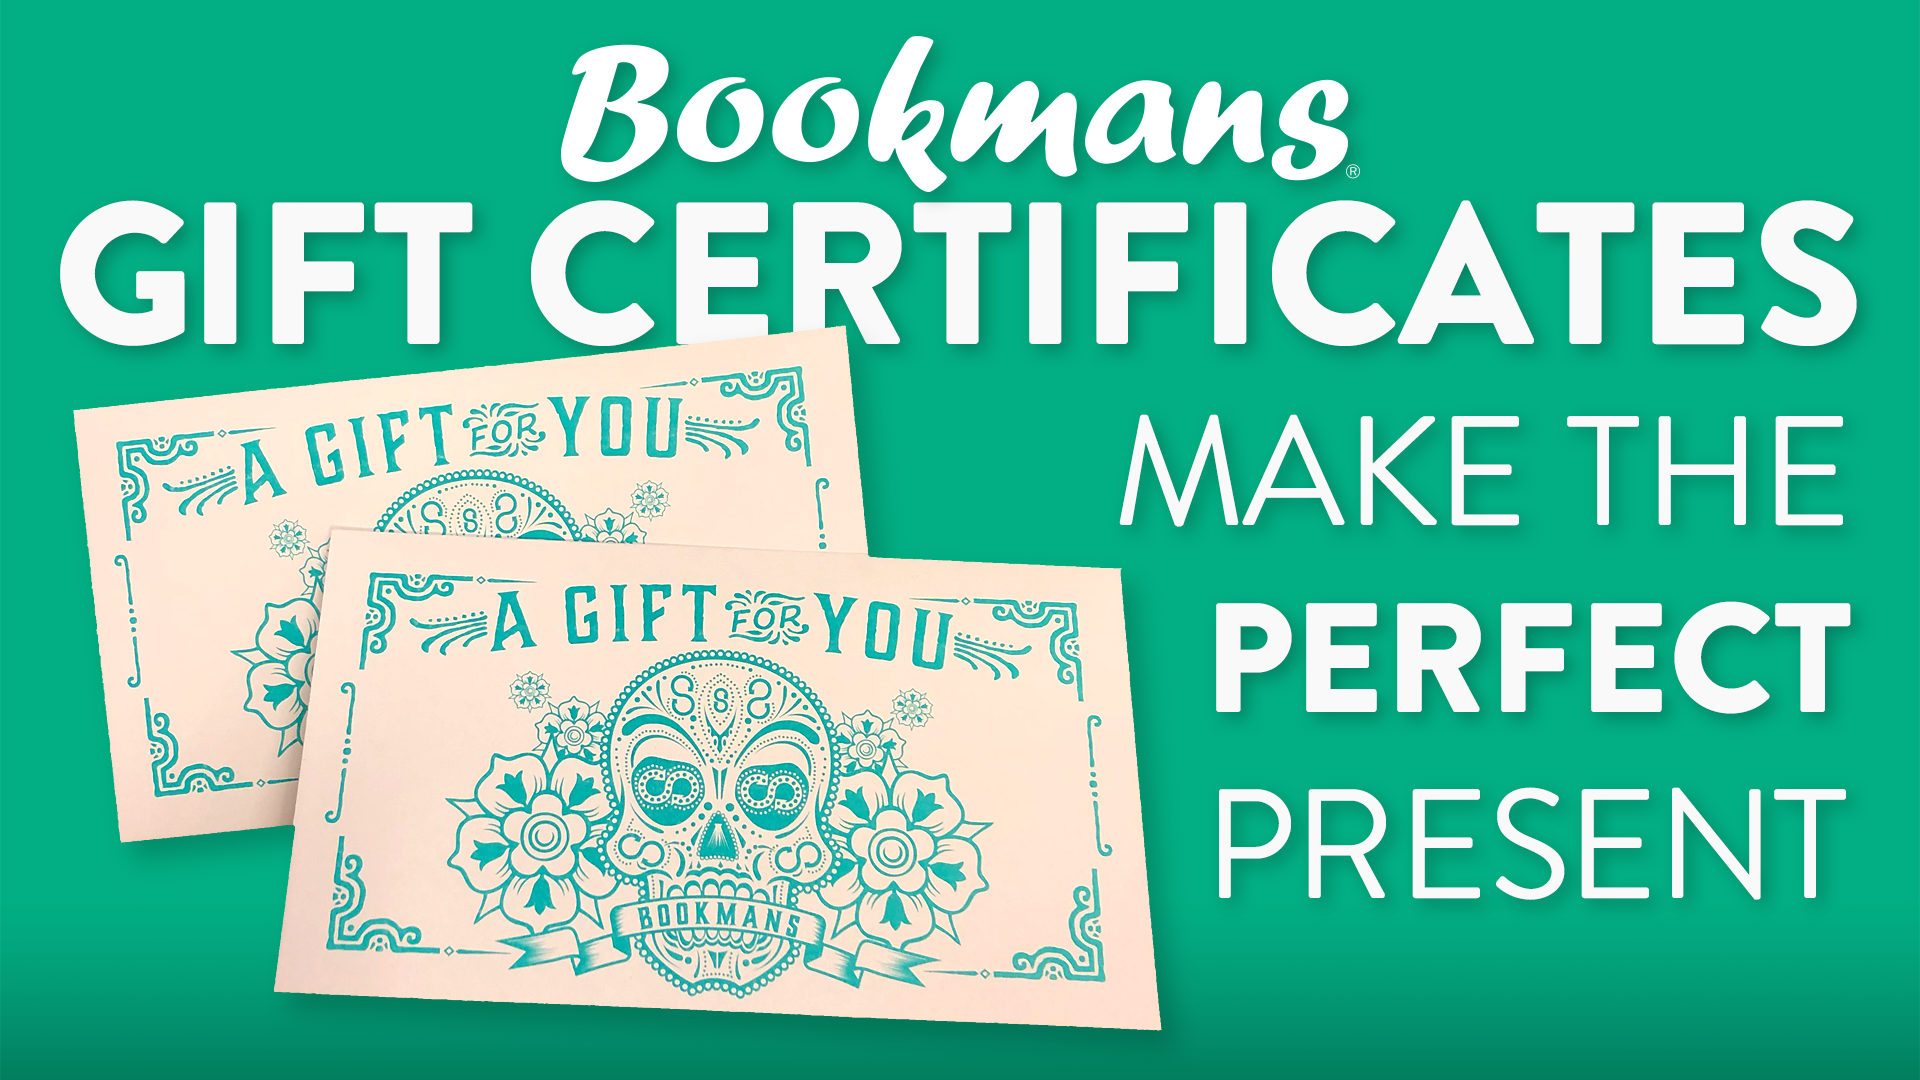 Bookmans gift certificates make the perfect gift text with bookmans gift card envelopes on a green background